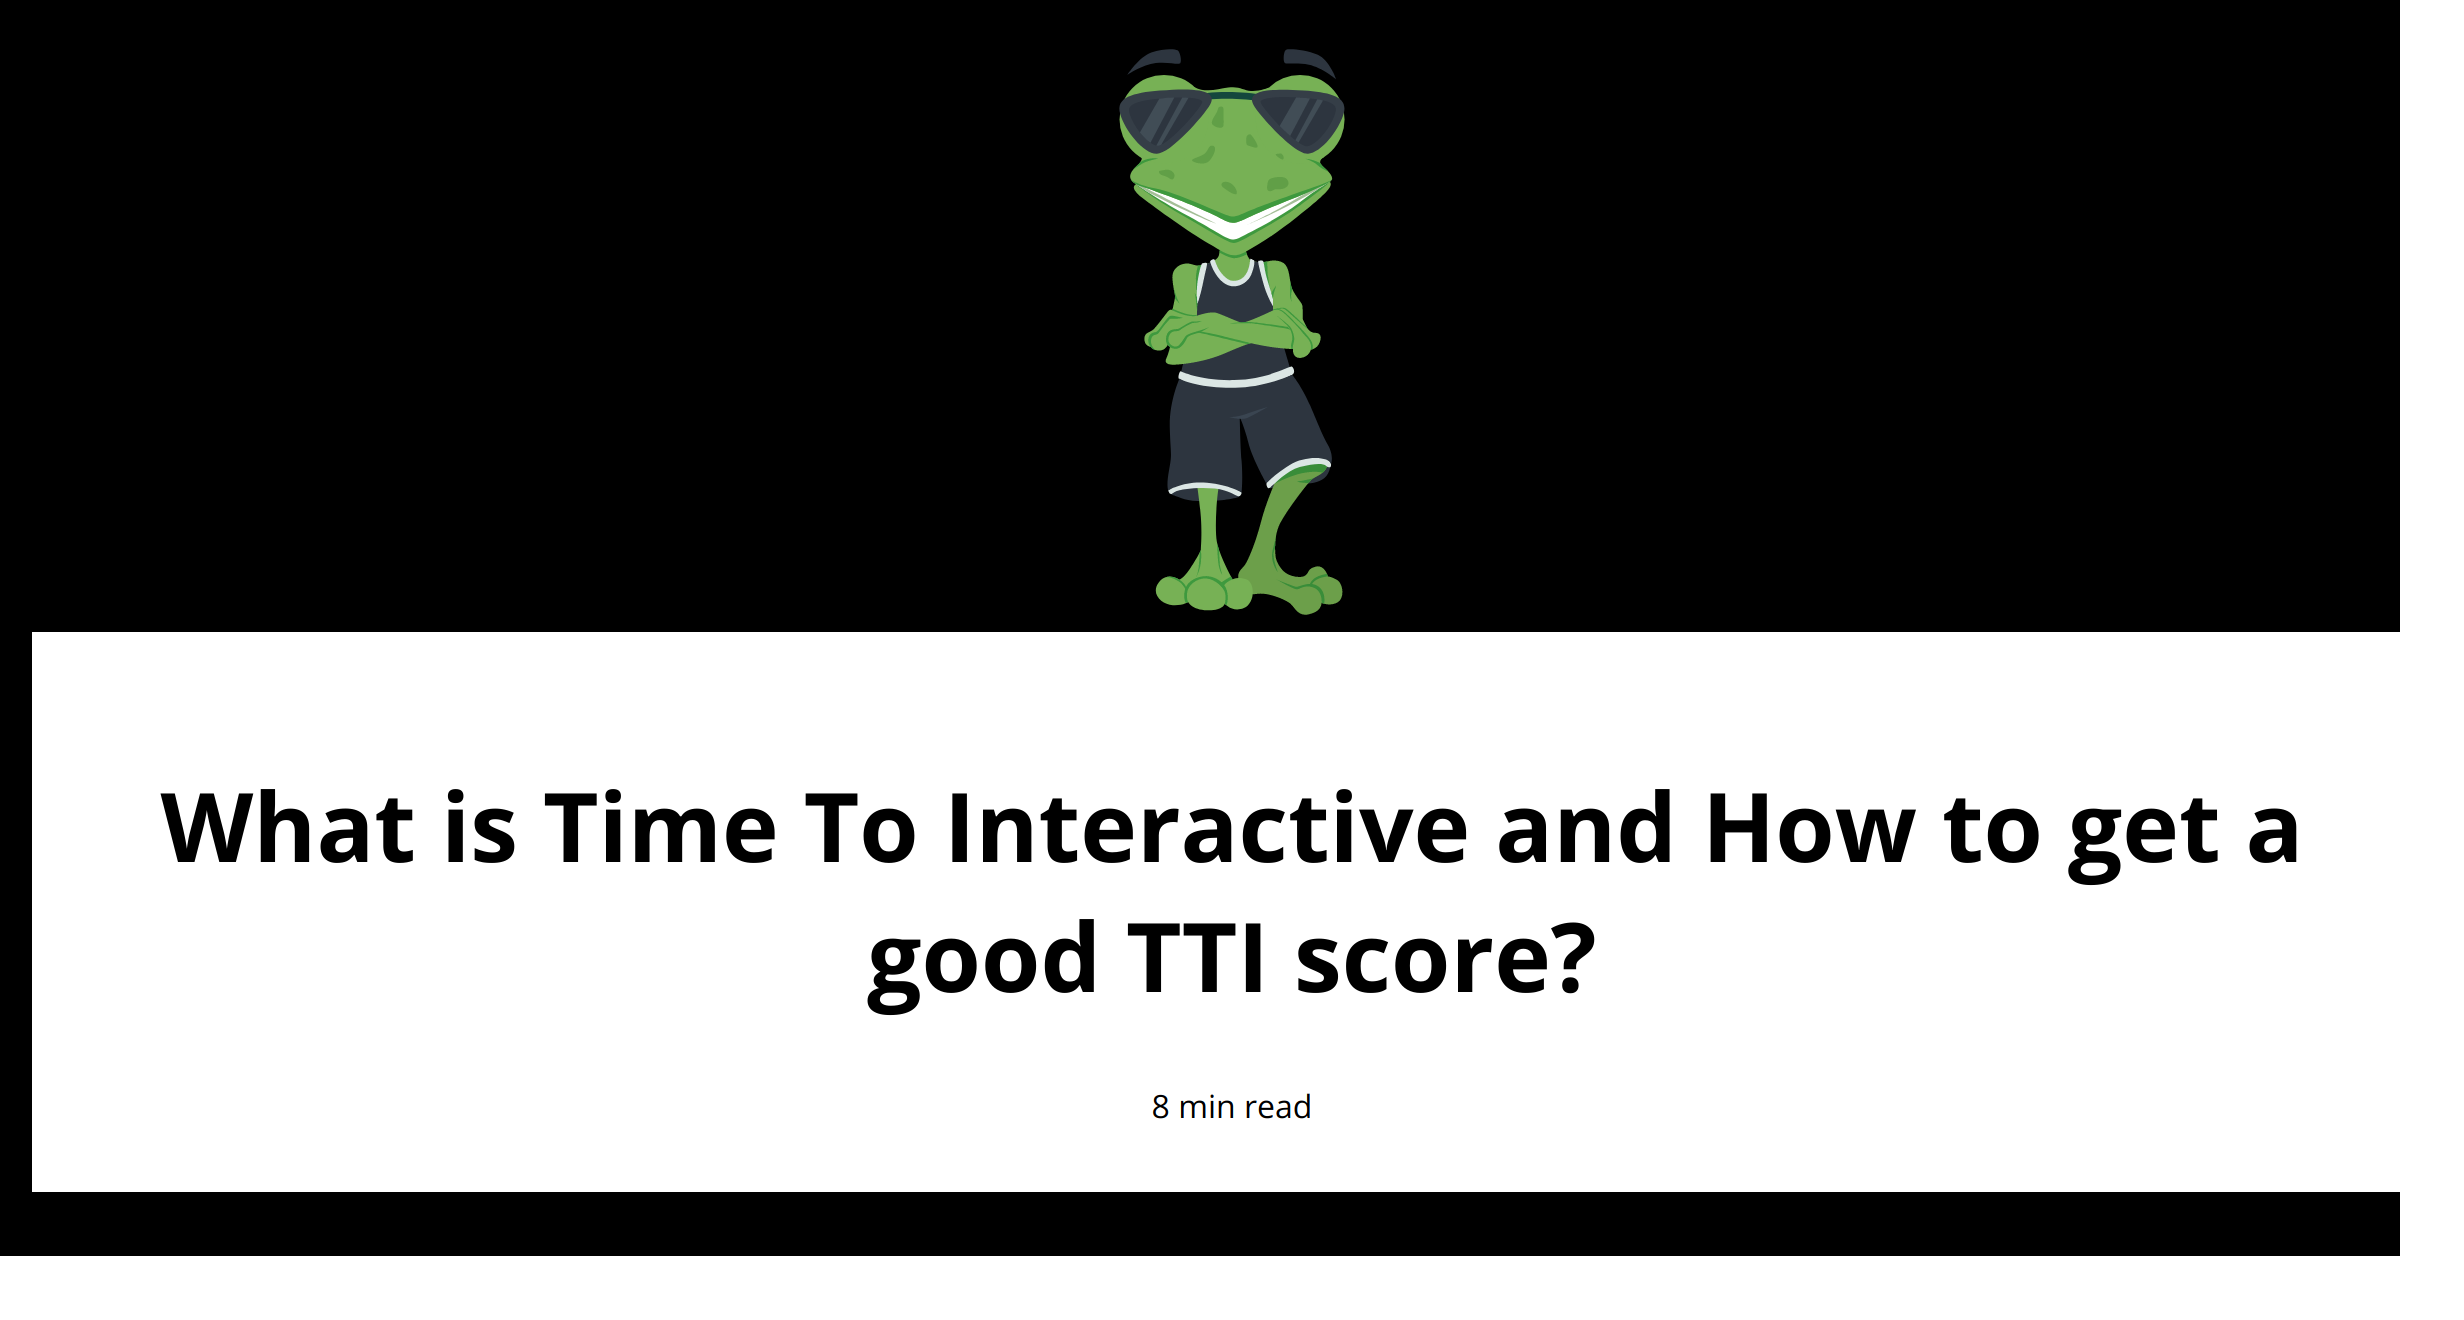 What is Time To Interactive and How to get a good TTI score?